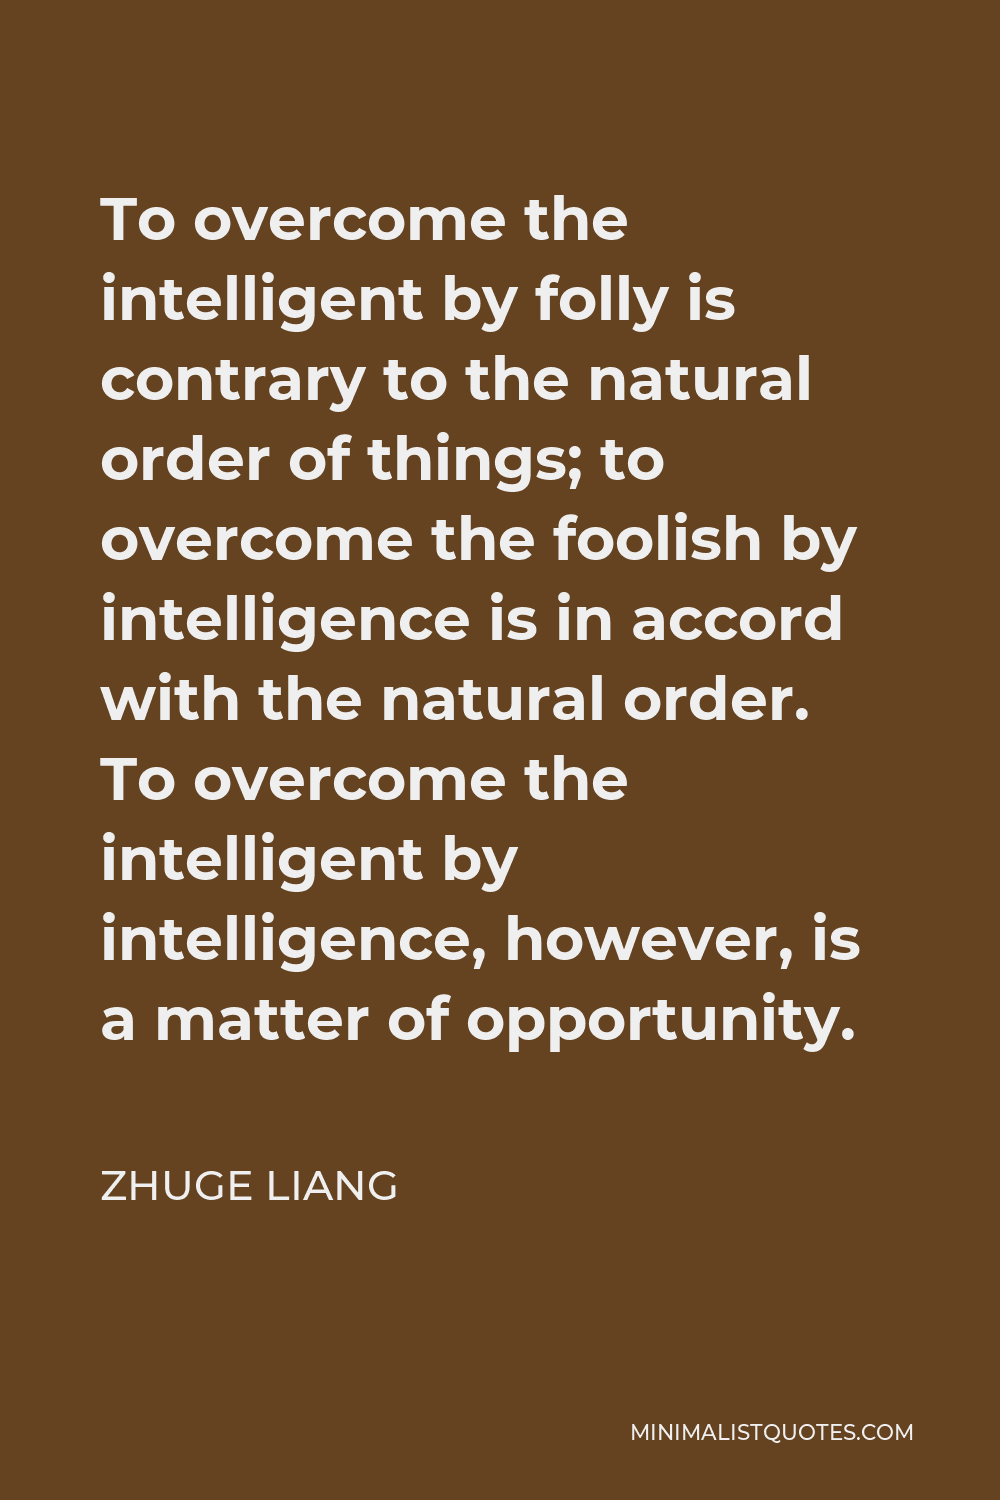 Zhuge Liang Quote - To overcome the intelligent by folly is contrary to the natural order of things; to overcome the foolish by intelligence is in accord with the natural order. To overcome the intelligent by intelligence, however, is a matter of opportunity.